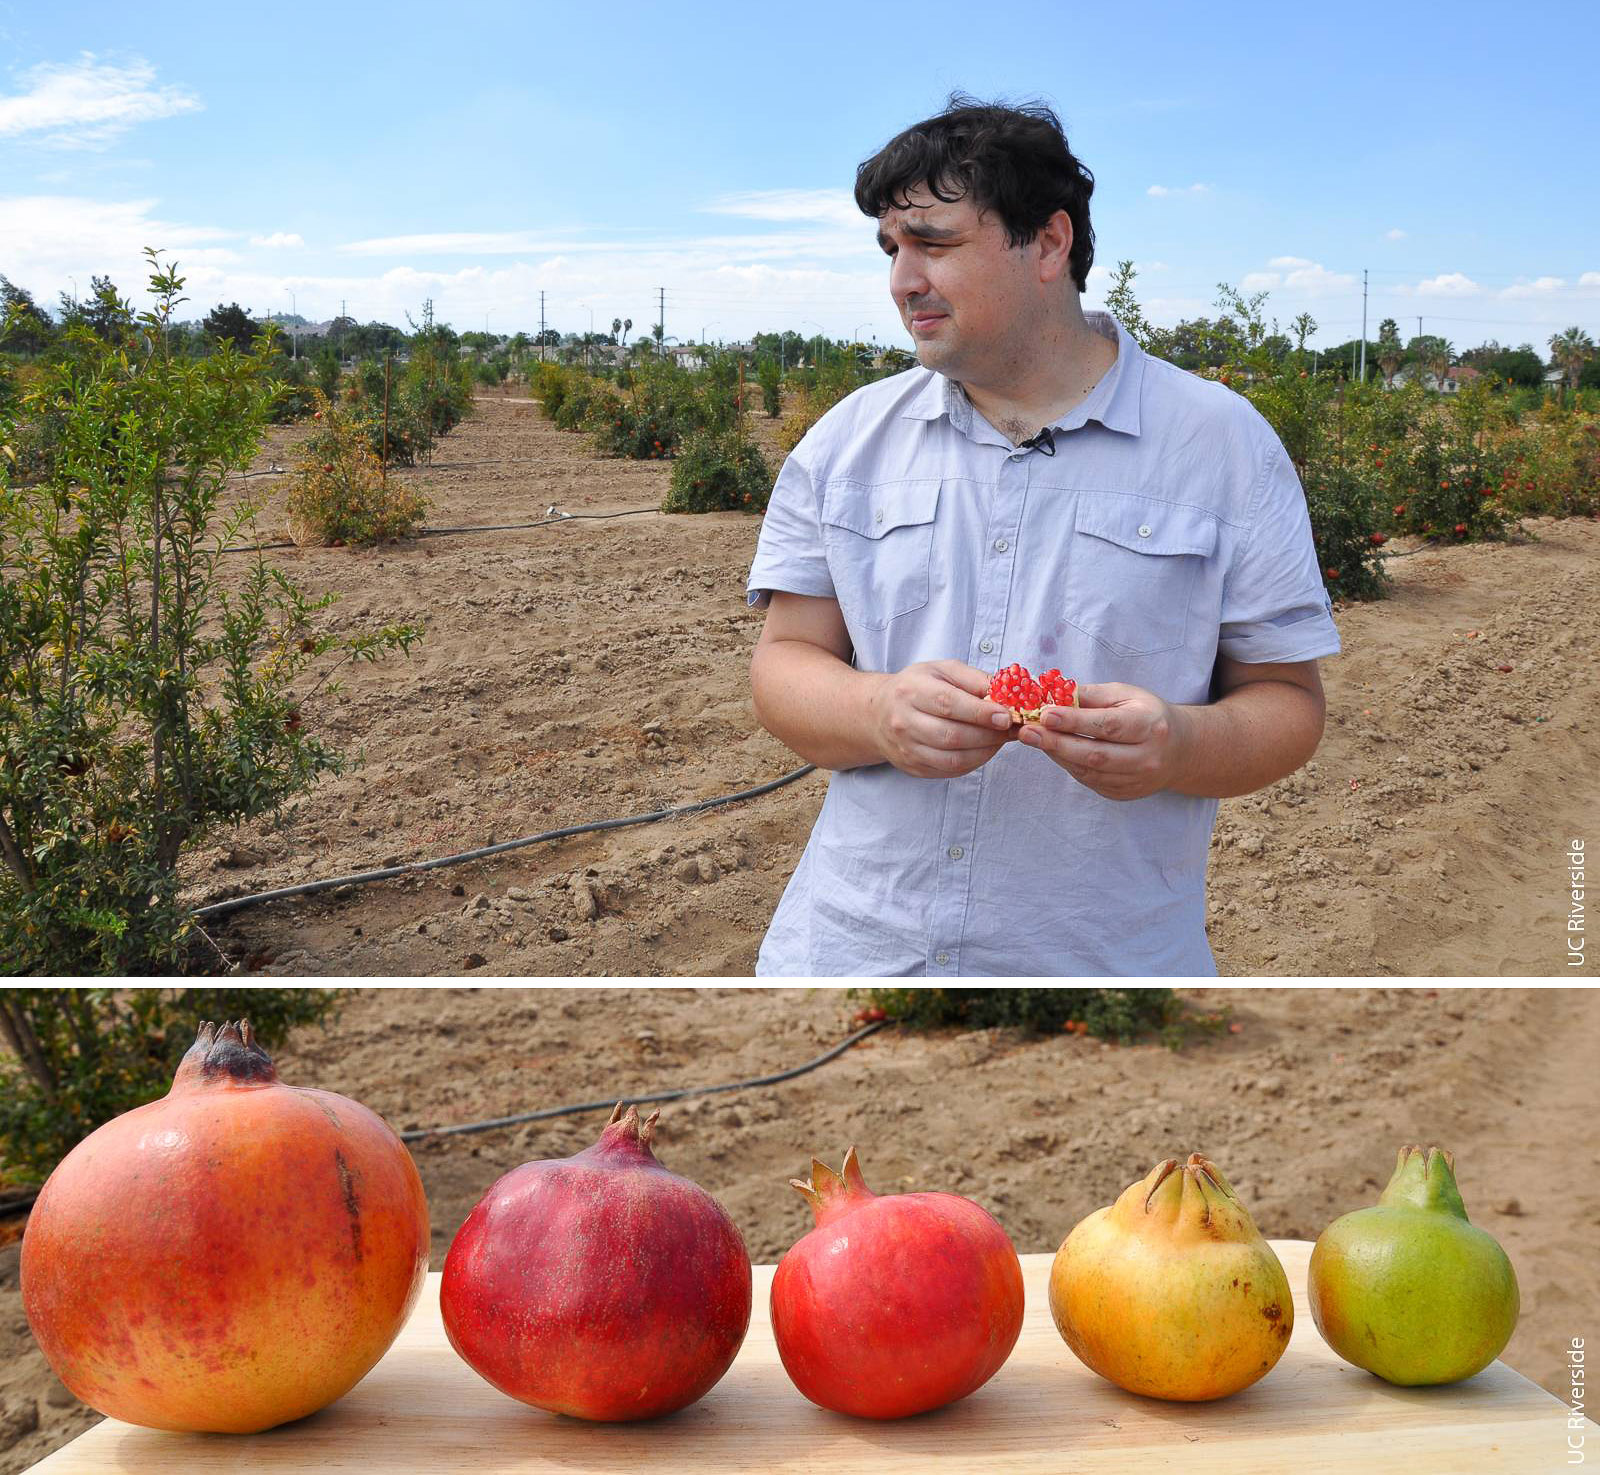 John Chater, a UC Riverside graduate student and Global Food Initiative Fellow, is carrying on a legacy of plant breeding work begun by his grandfather, who brought pomegranate seeds from Lebanon and launched a breeding program in Ventura County.